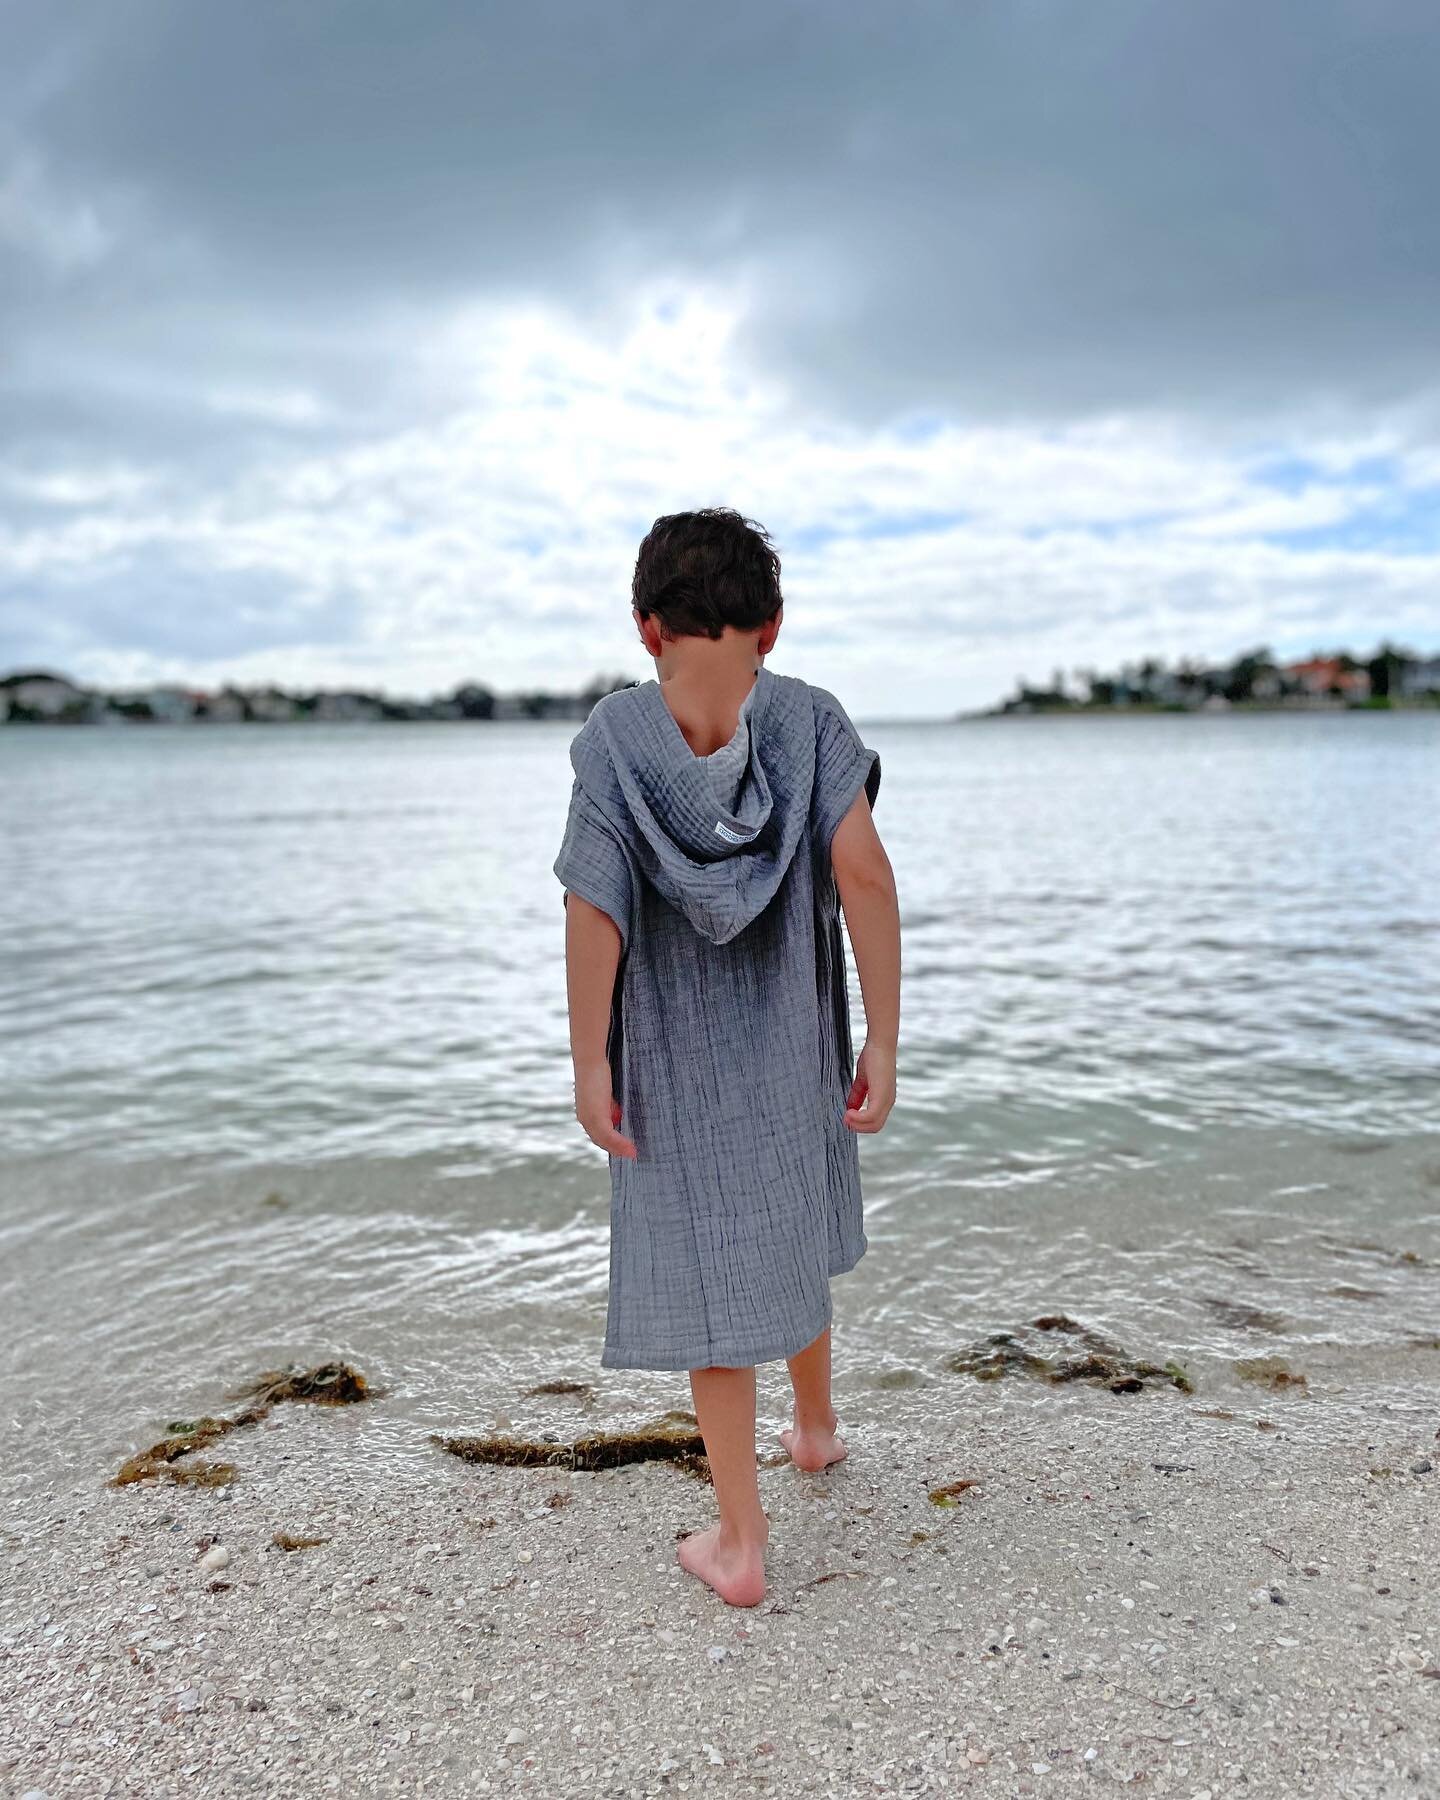 Explorer casual.
◽️
Kids' Ojo Poncho now available at artguyworkshop.com
◽️
Hooded, flowy, comfy poncho for all the fun. Quick to dry. 

#youarehere #hereisgood #mindfulnesspractice  #presentmoment #gentlereminder #turkishtowels #artguyworkshop #pres